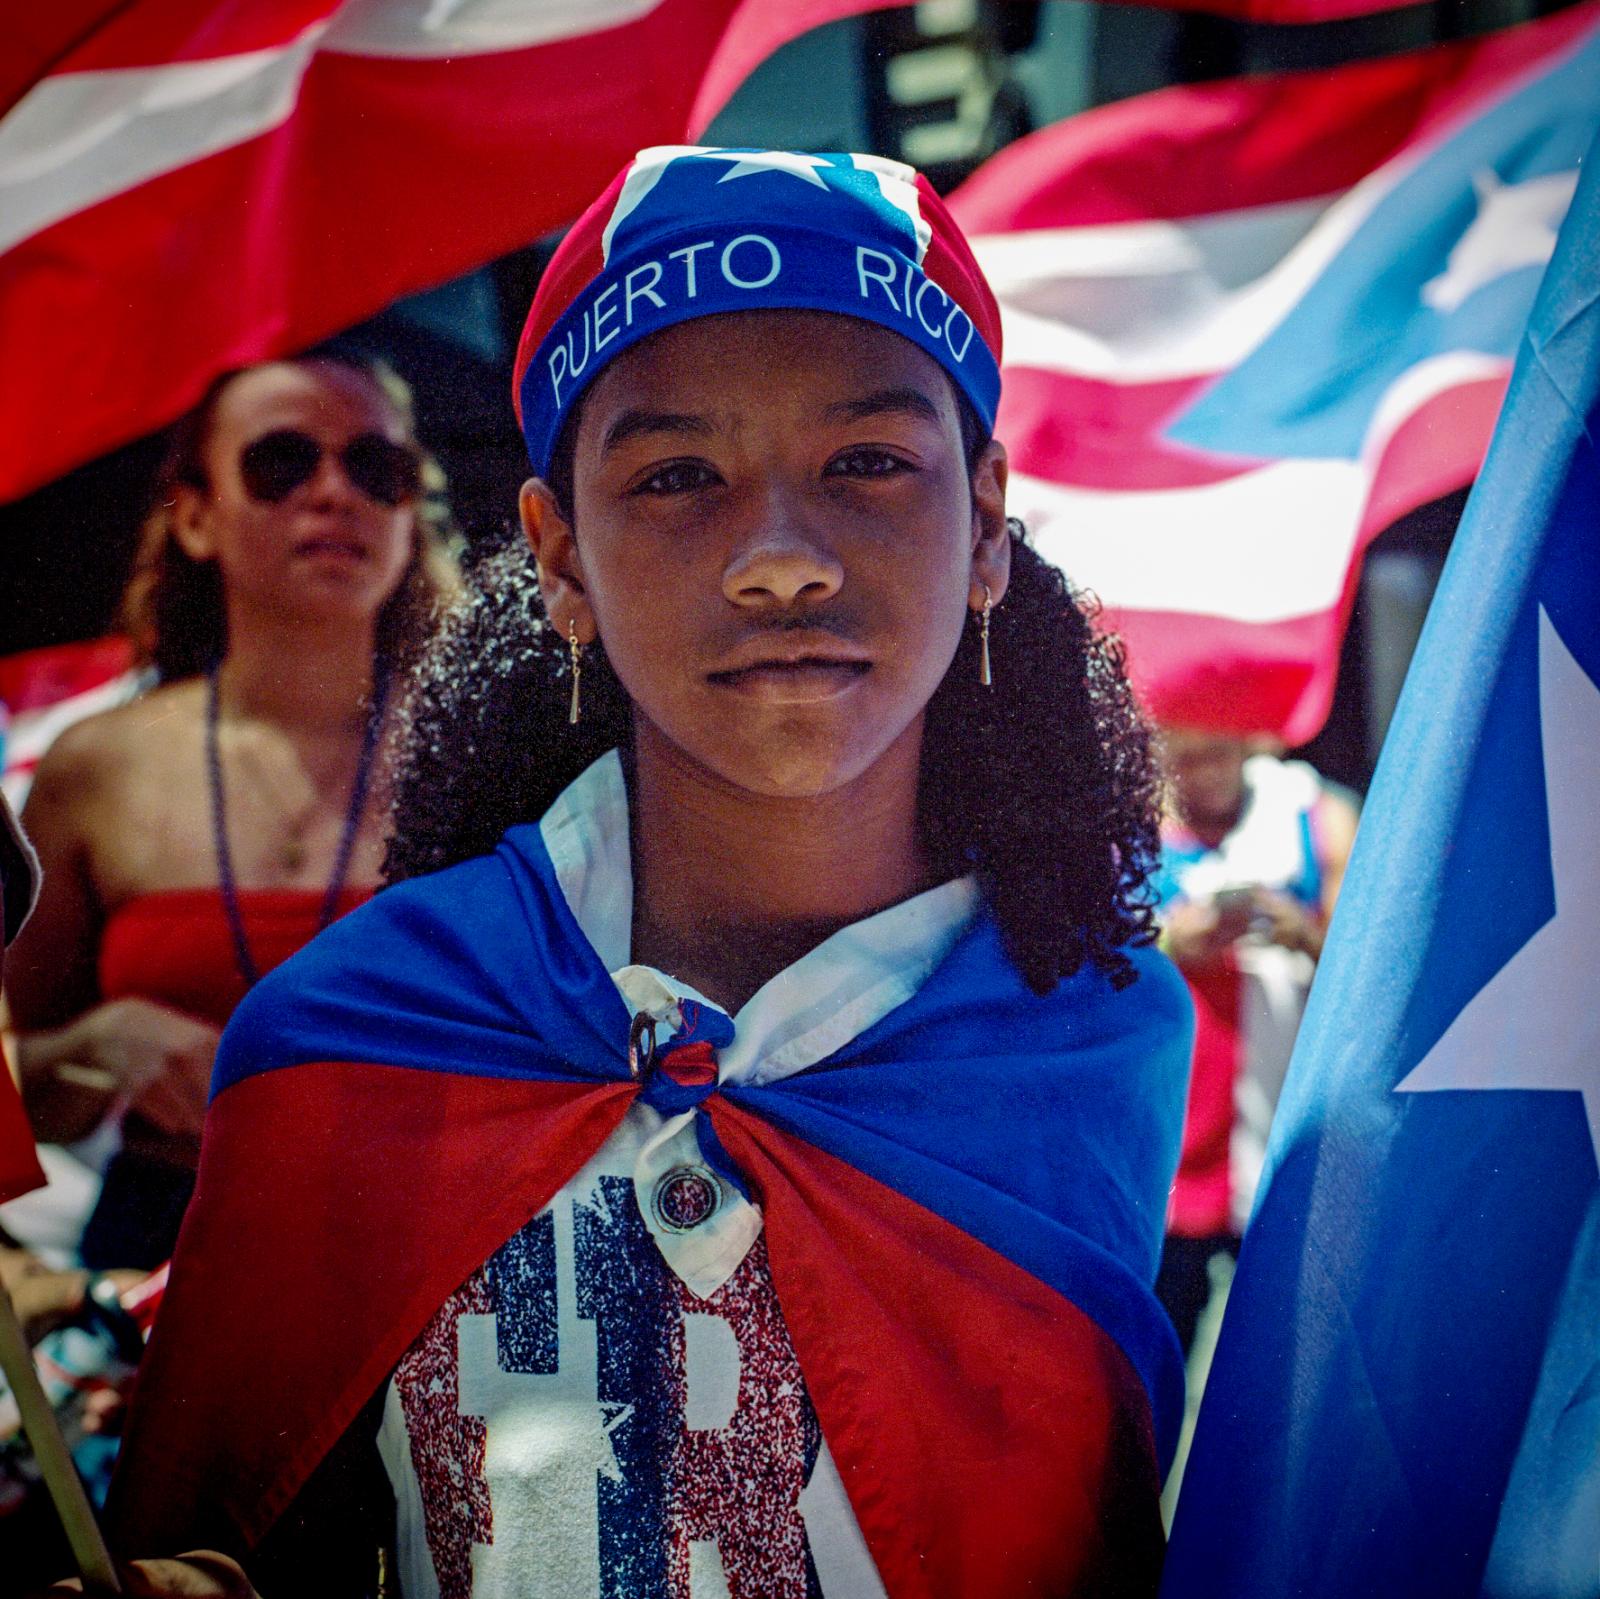 Untitled, Puerto Rican Day Parade, 2019.